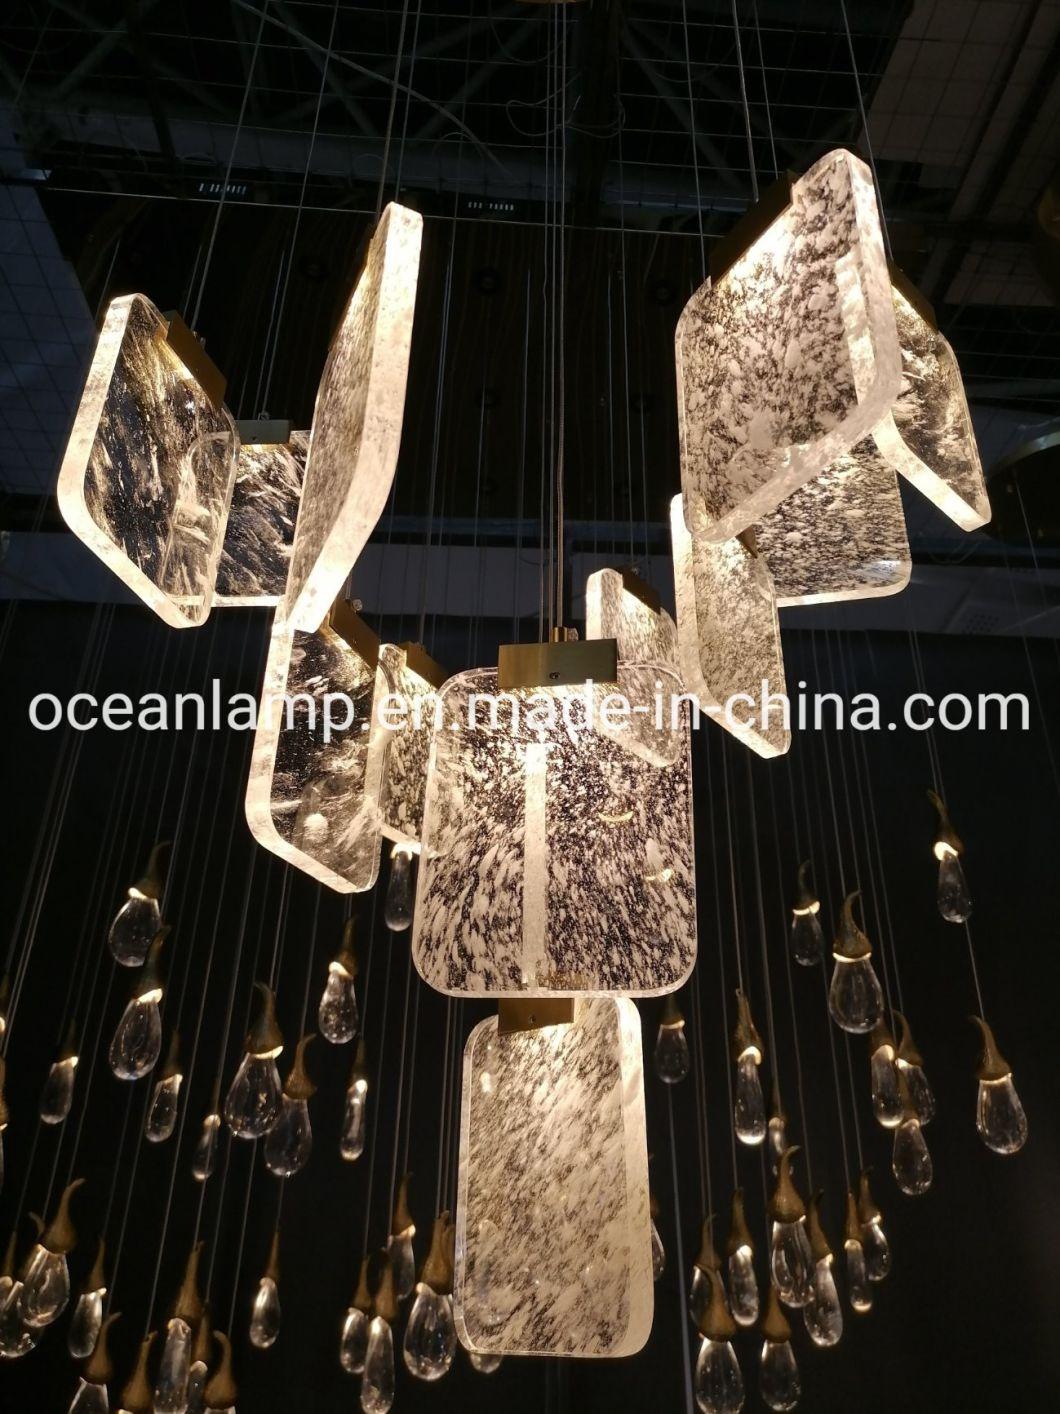 2020 Year Staircase Lamp Hotel Project Pendant Chandelier Decorative Light for Hotel, Restaurant